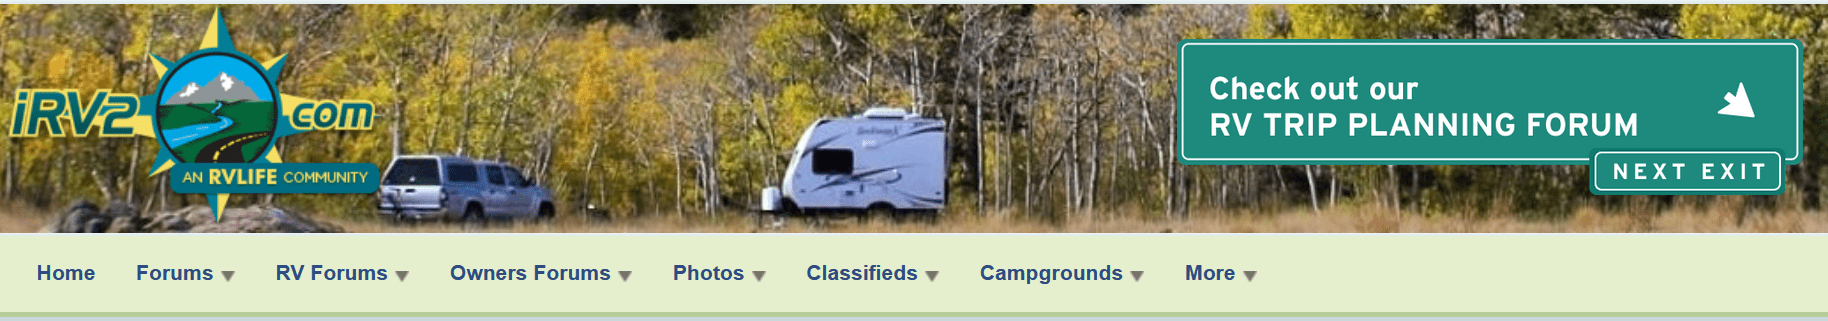 IRV2 is a longtime friendly RV forum.